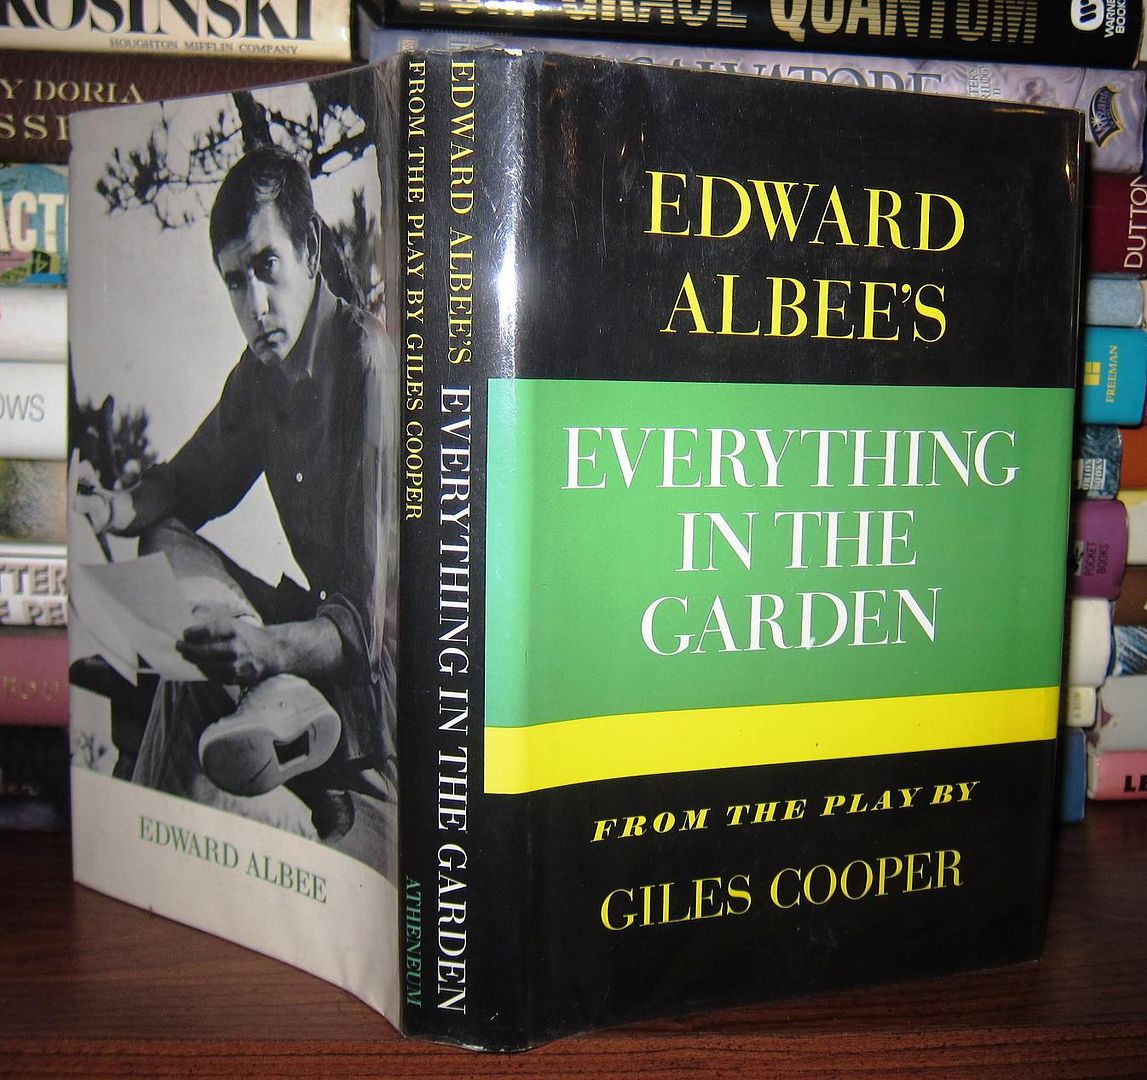 ALBEE, EDWARD; GILES COOPER - Everything in the Garden from the Play by Giles Cooper